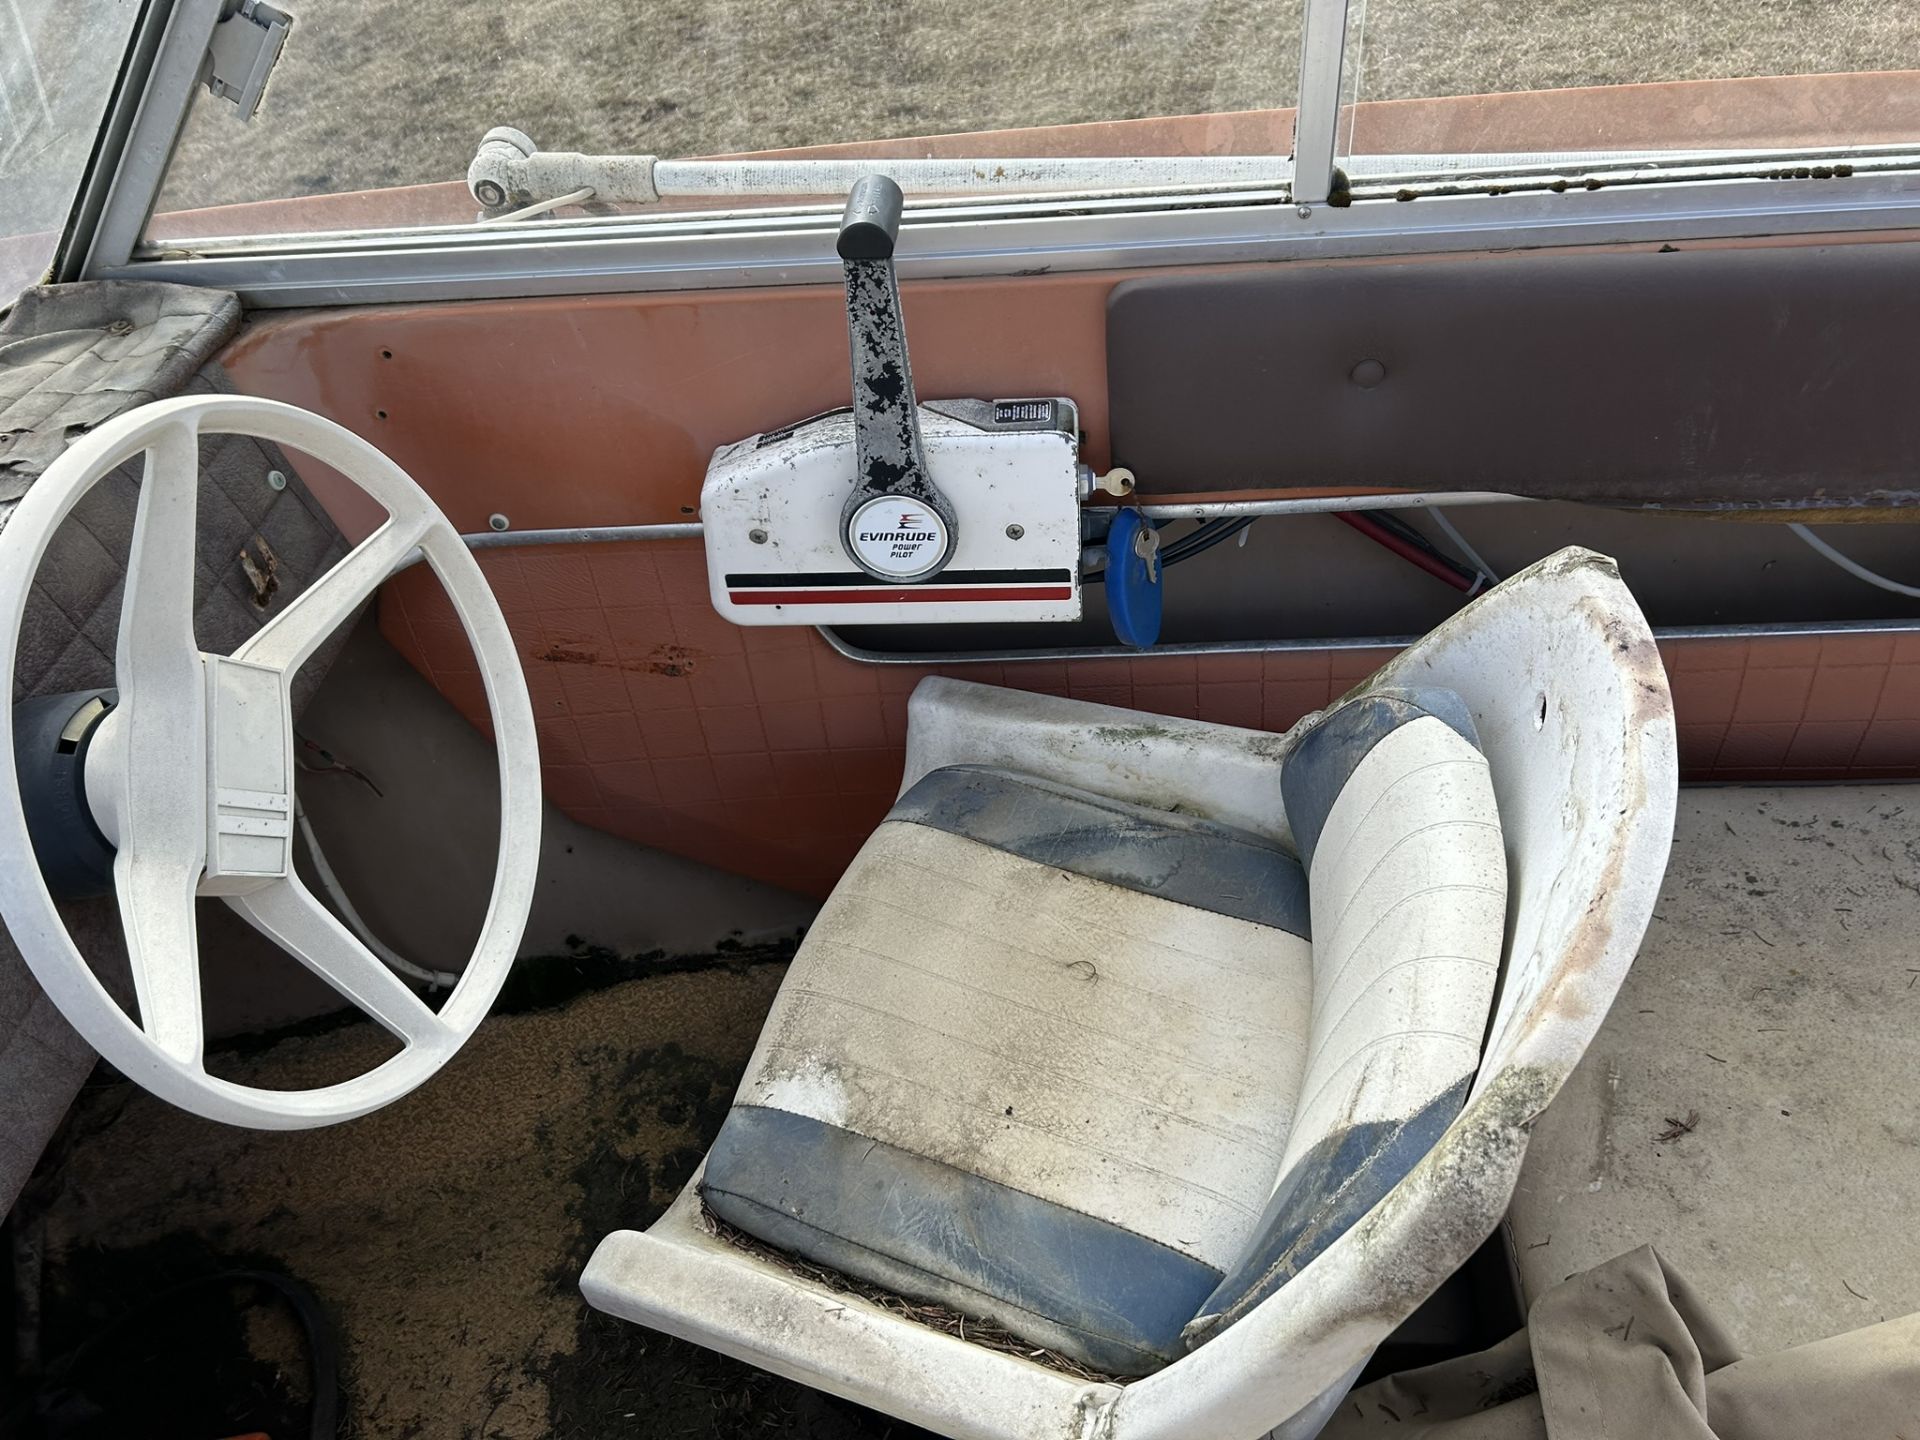 1973 DOUBLE EAGLE BOAT W/ 70 HP EVENRUDE & 10 HP CHRYSLER TROLLING MOTOR S/N ZBC039070677 AND 186 - Image 11 of 11